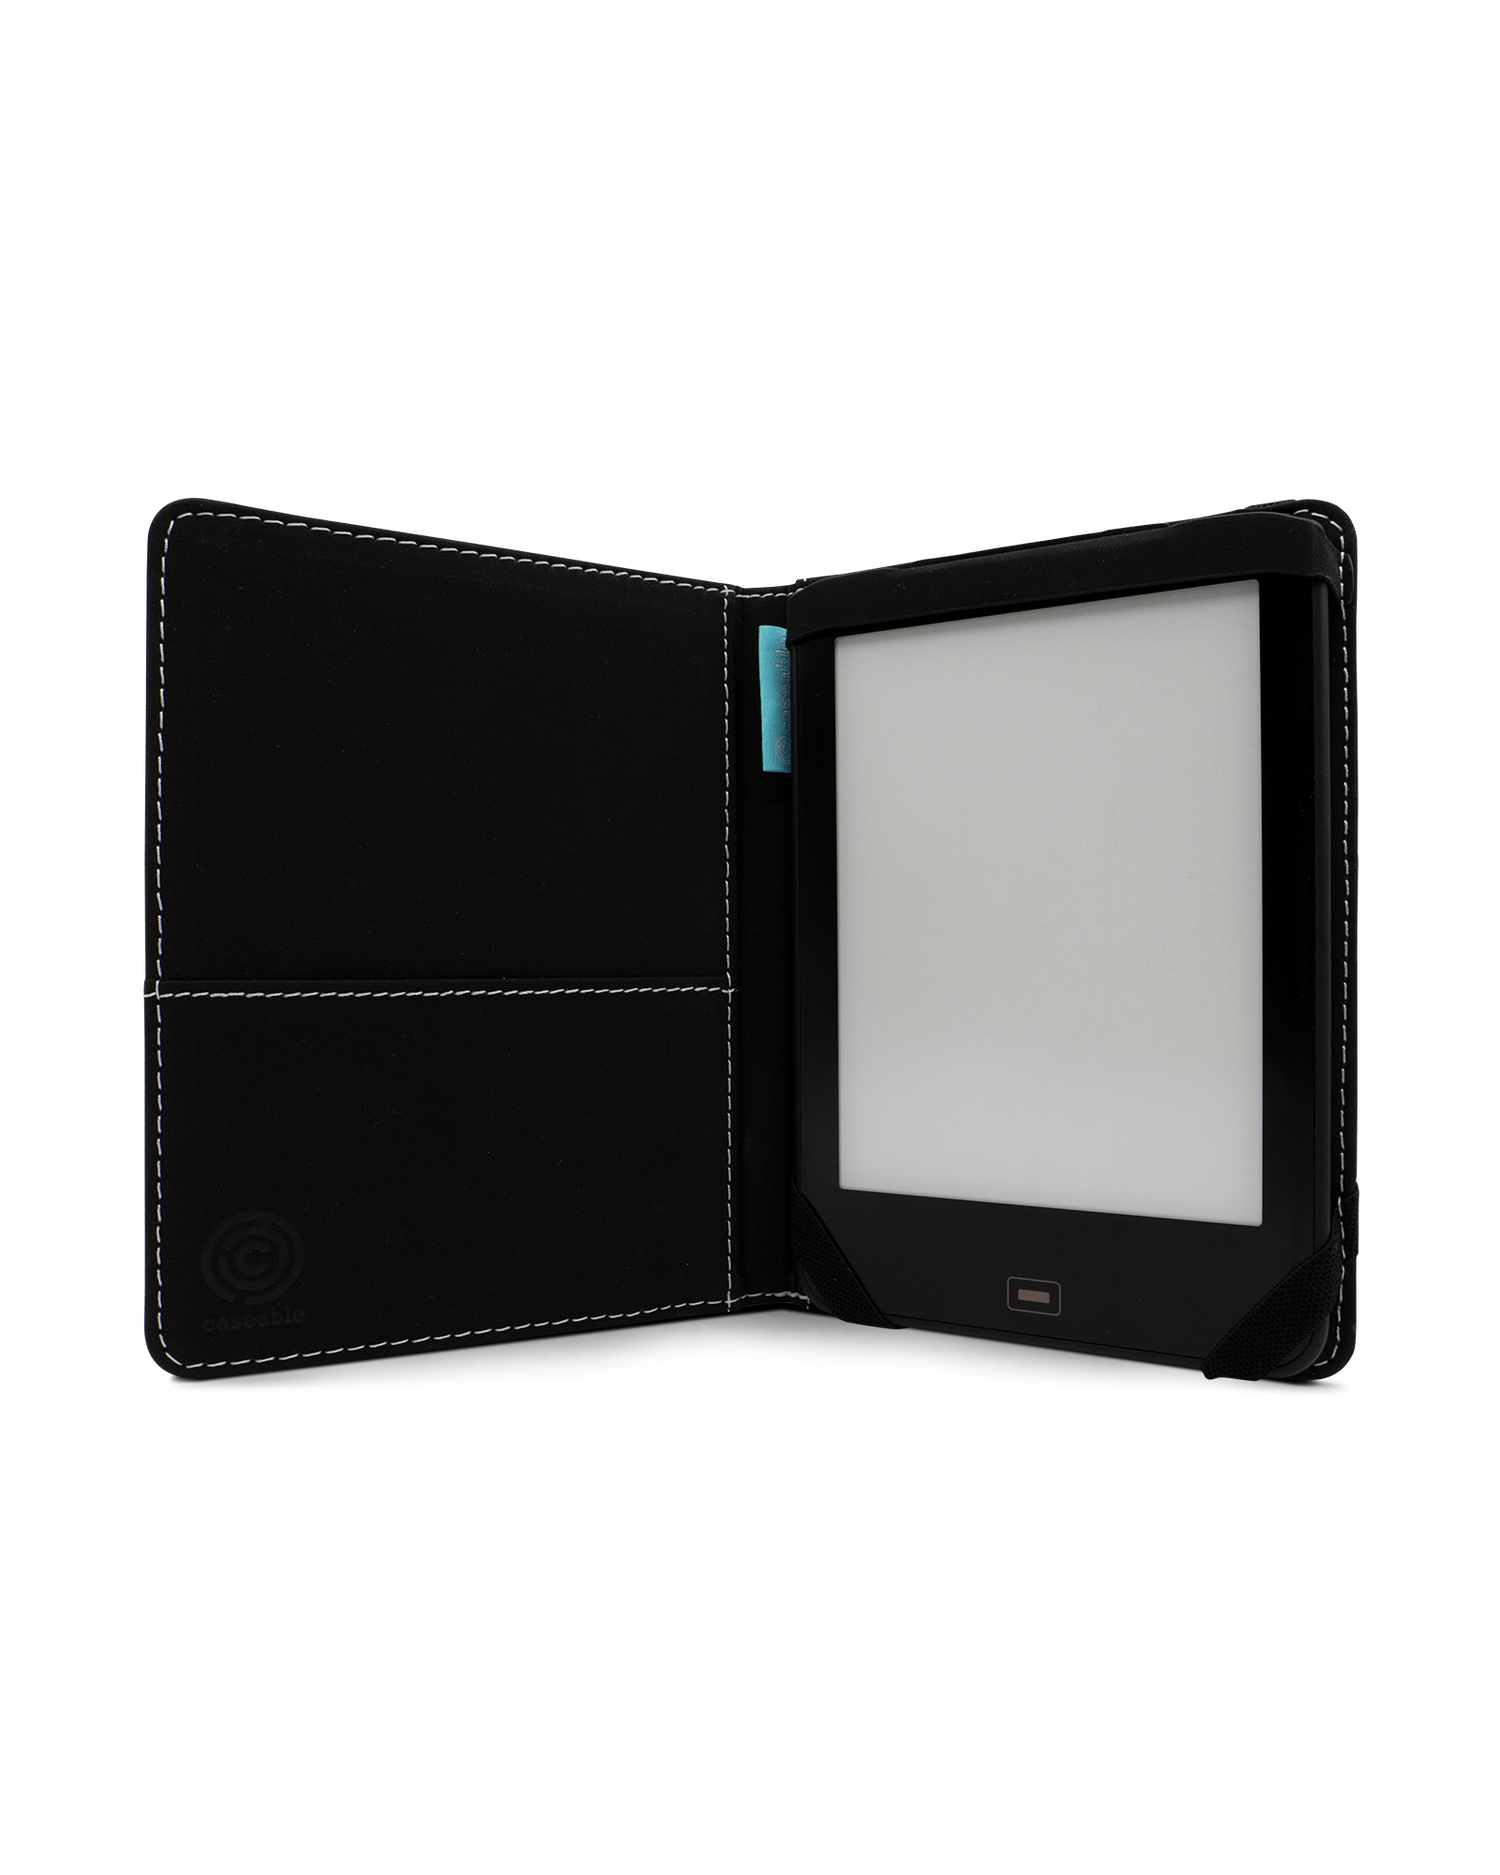 ISG Black eReader Case for tolino vision 1 to 4 HD: Opened interior view